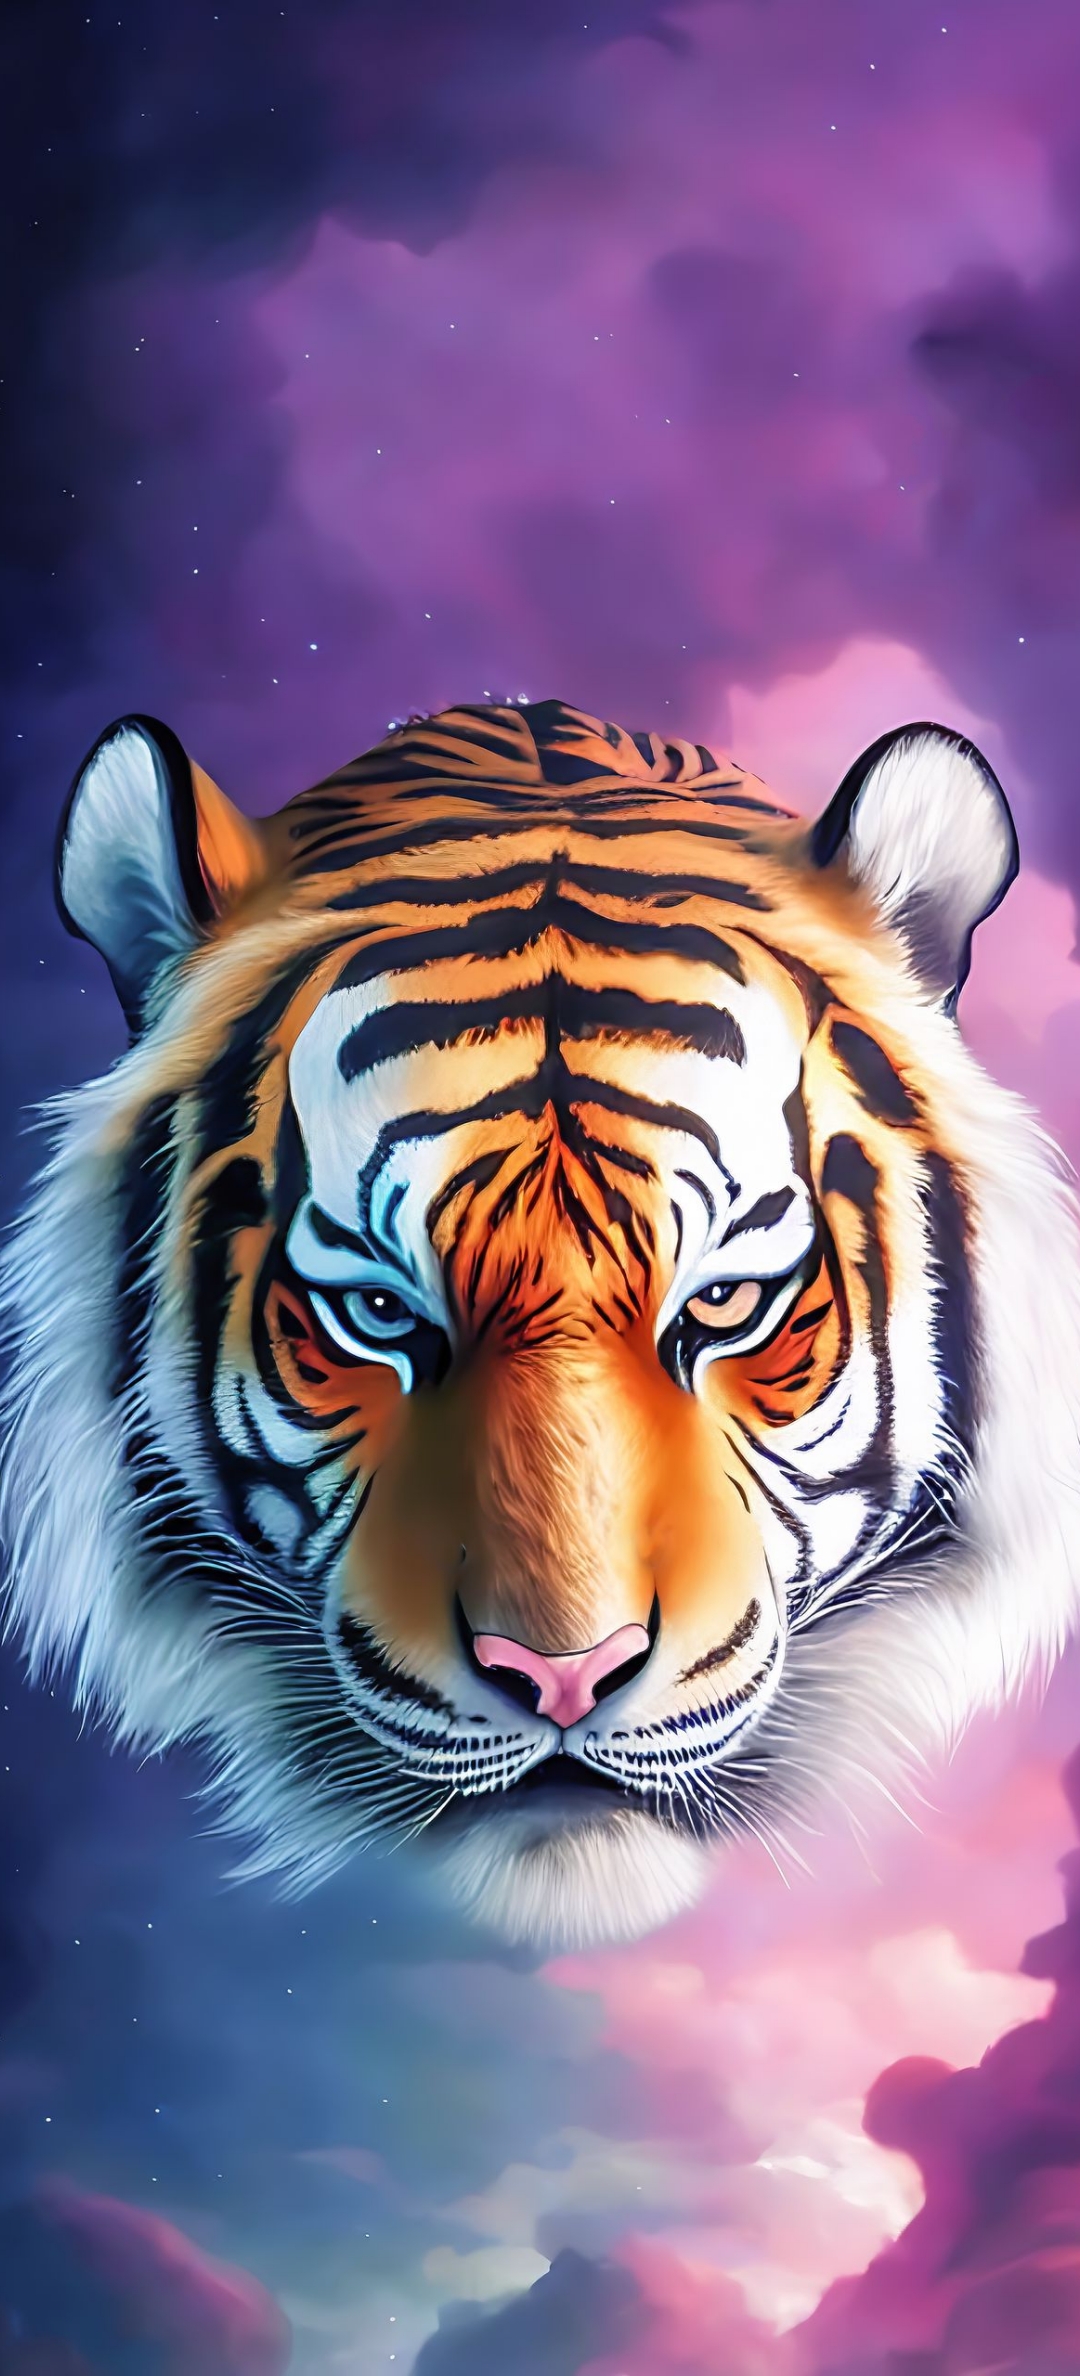 Wallpaper Galaxy Lion Lion Tiger Android Soundcloud Background   Download Free Image